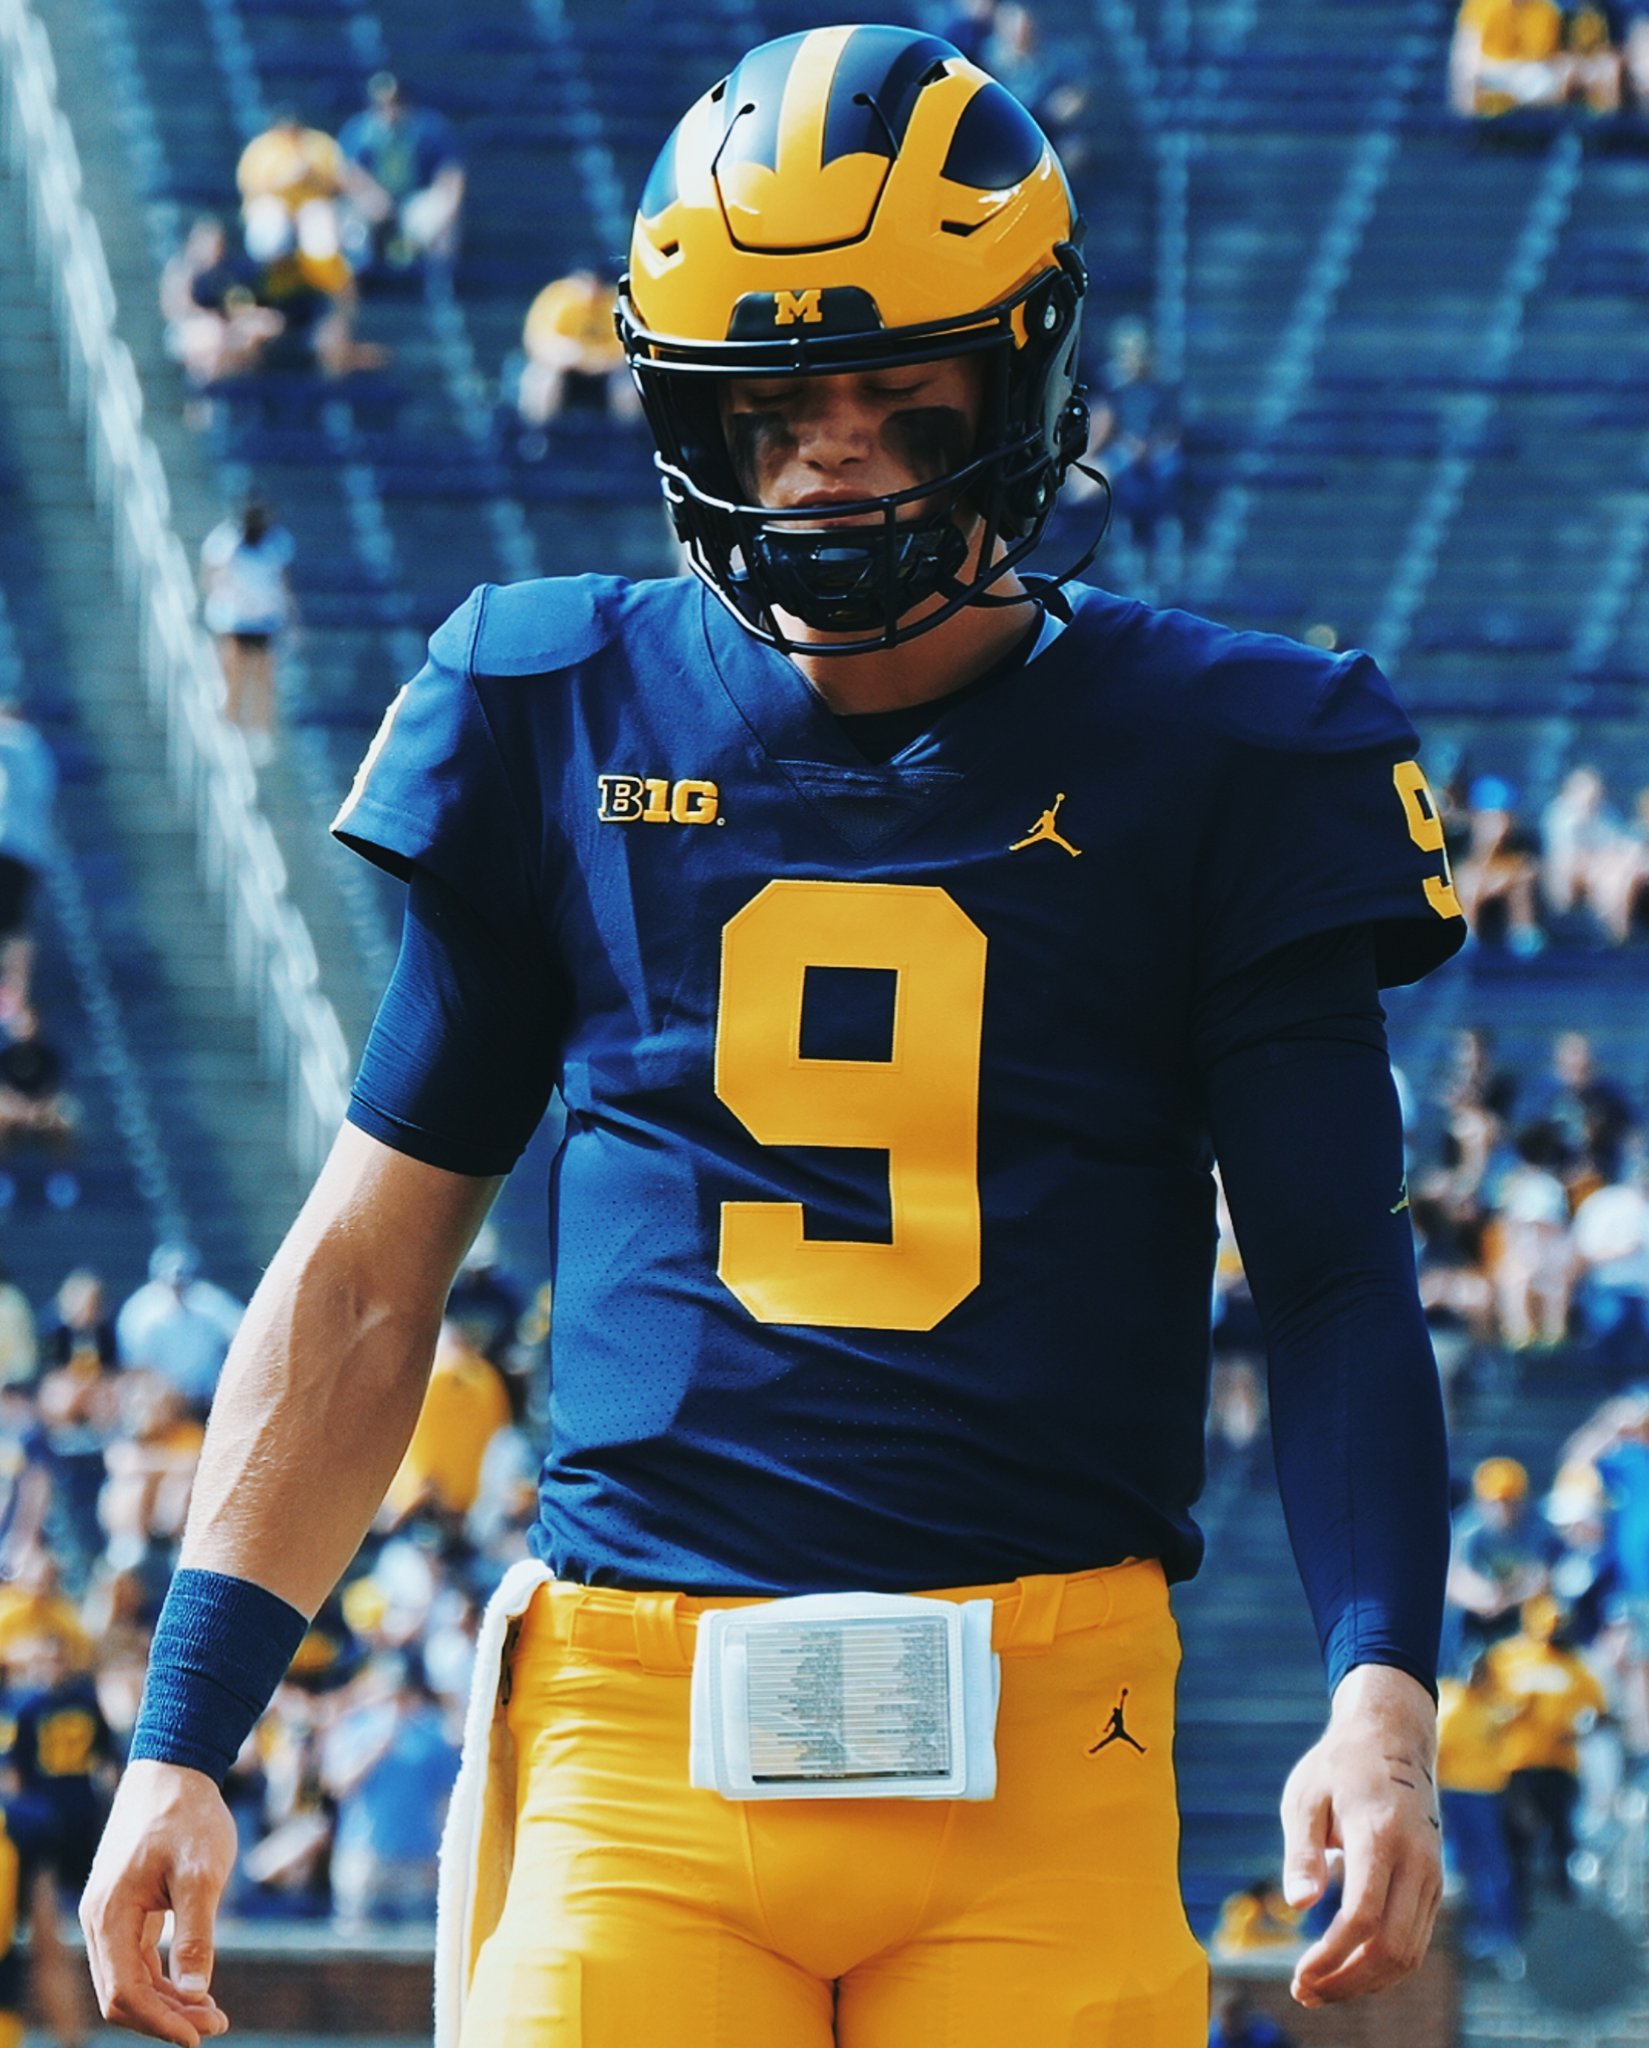 The Winged Helmet McCarthy will get his first start tomorrow night, exactly 218 days since his official commitment to the University of Michigan.〽️